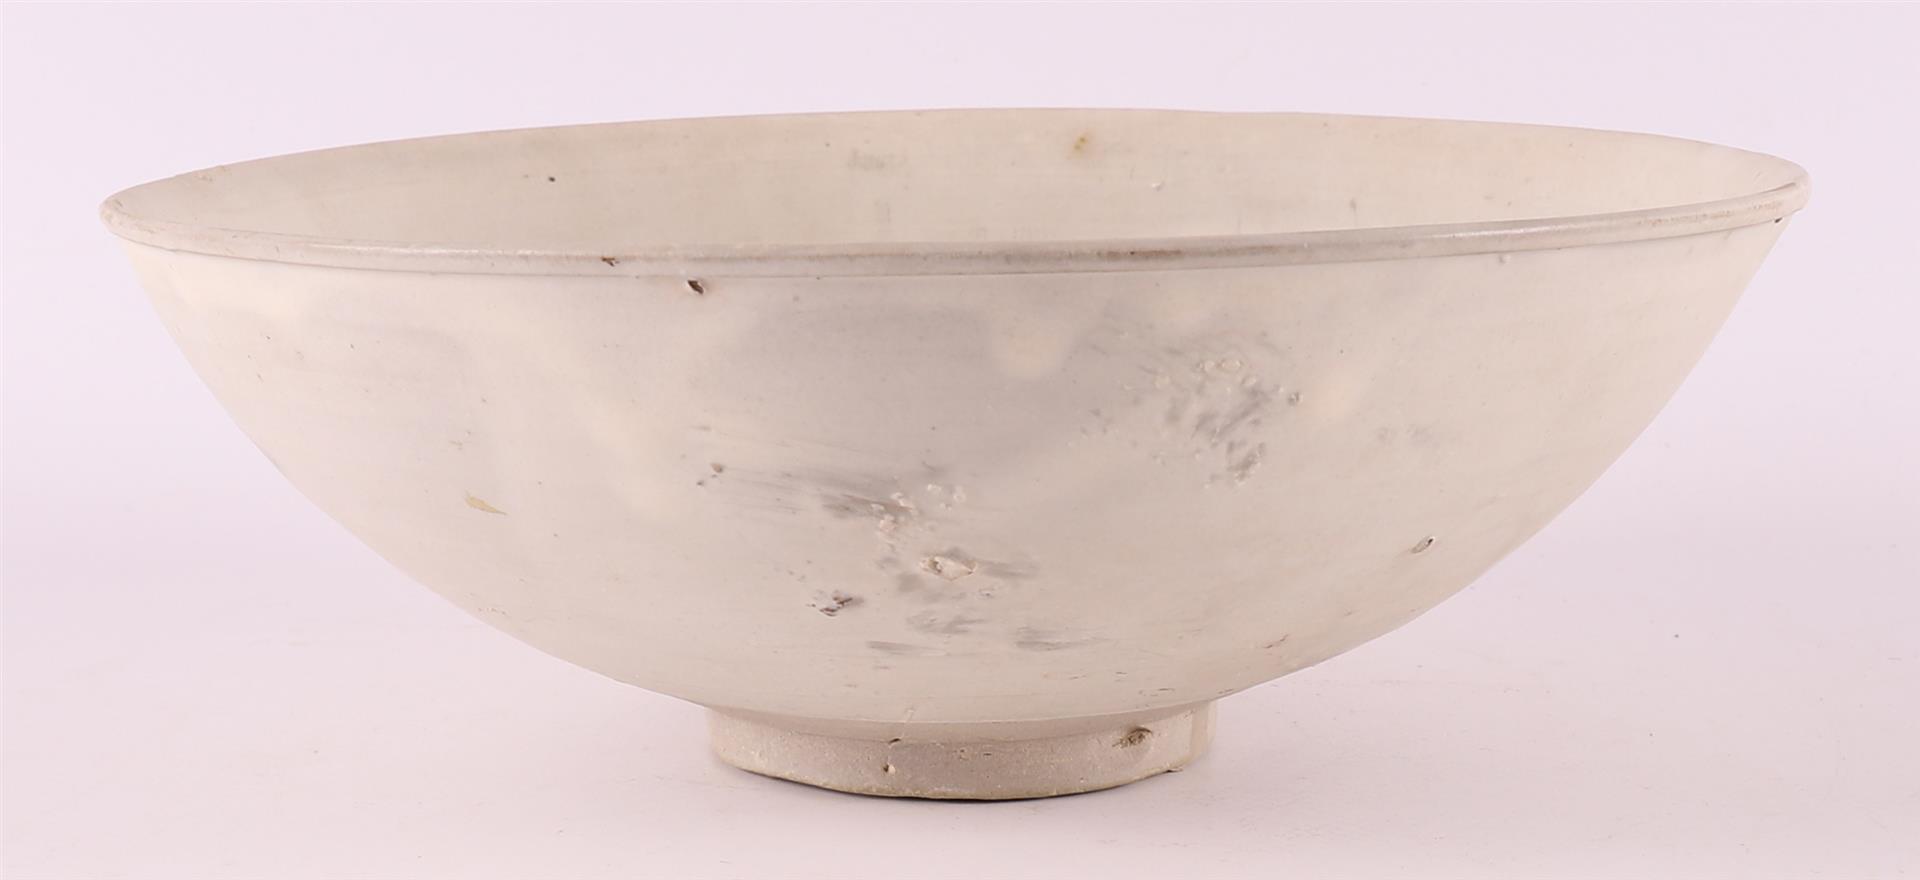 A white porcelain bowl with sgraffito decor, China, Sung, 12th/13th C. - Image 4 of 8